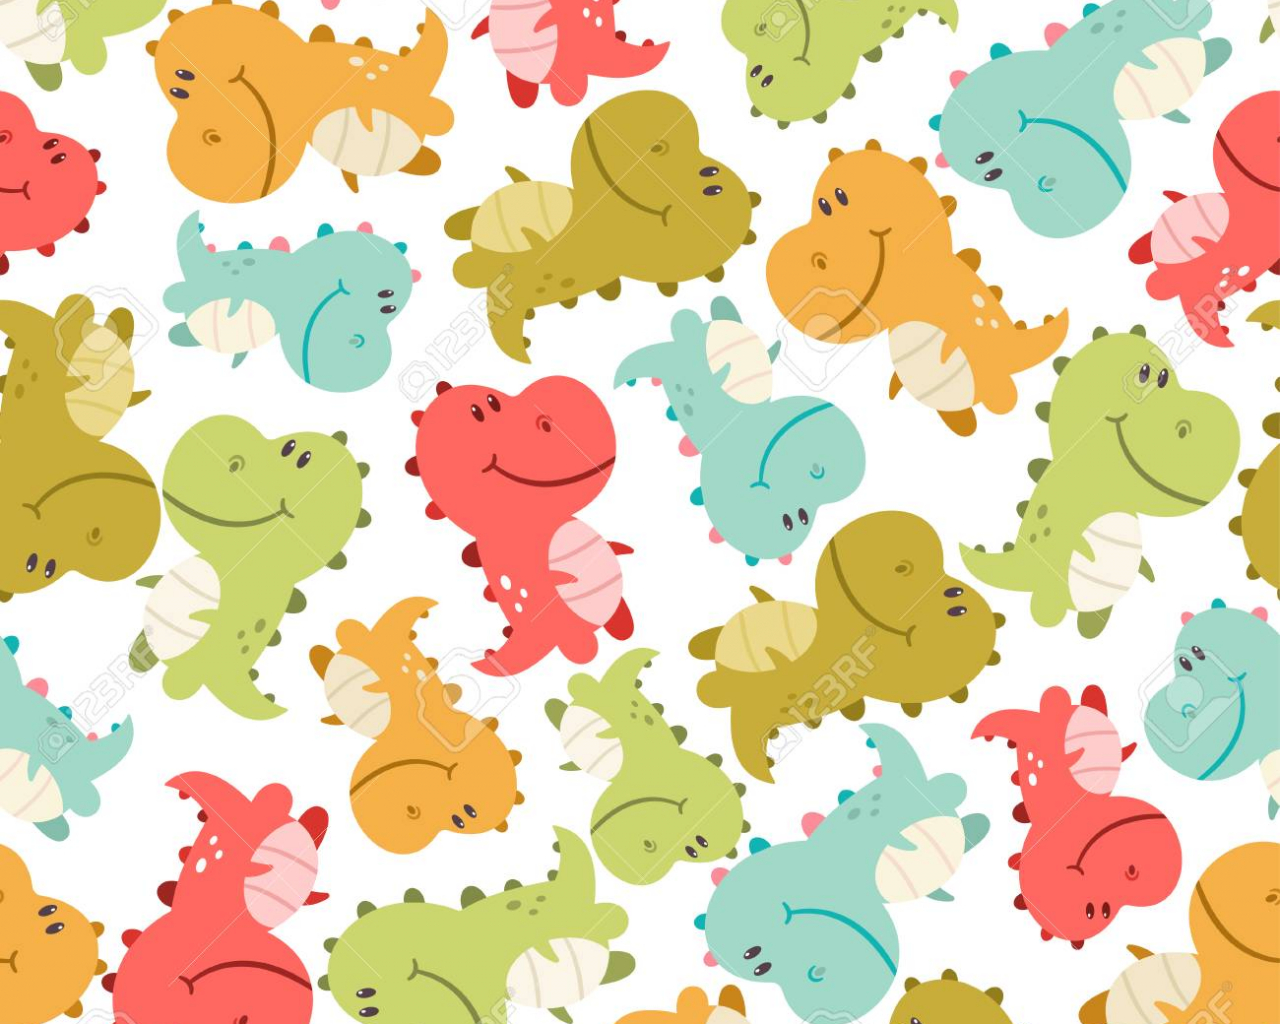 Free download Cute Baby Dinosaurs Vector Seamless Pattern On White